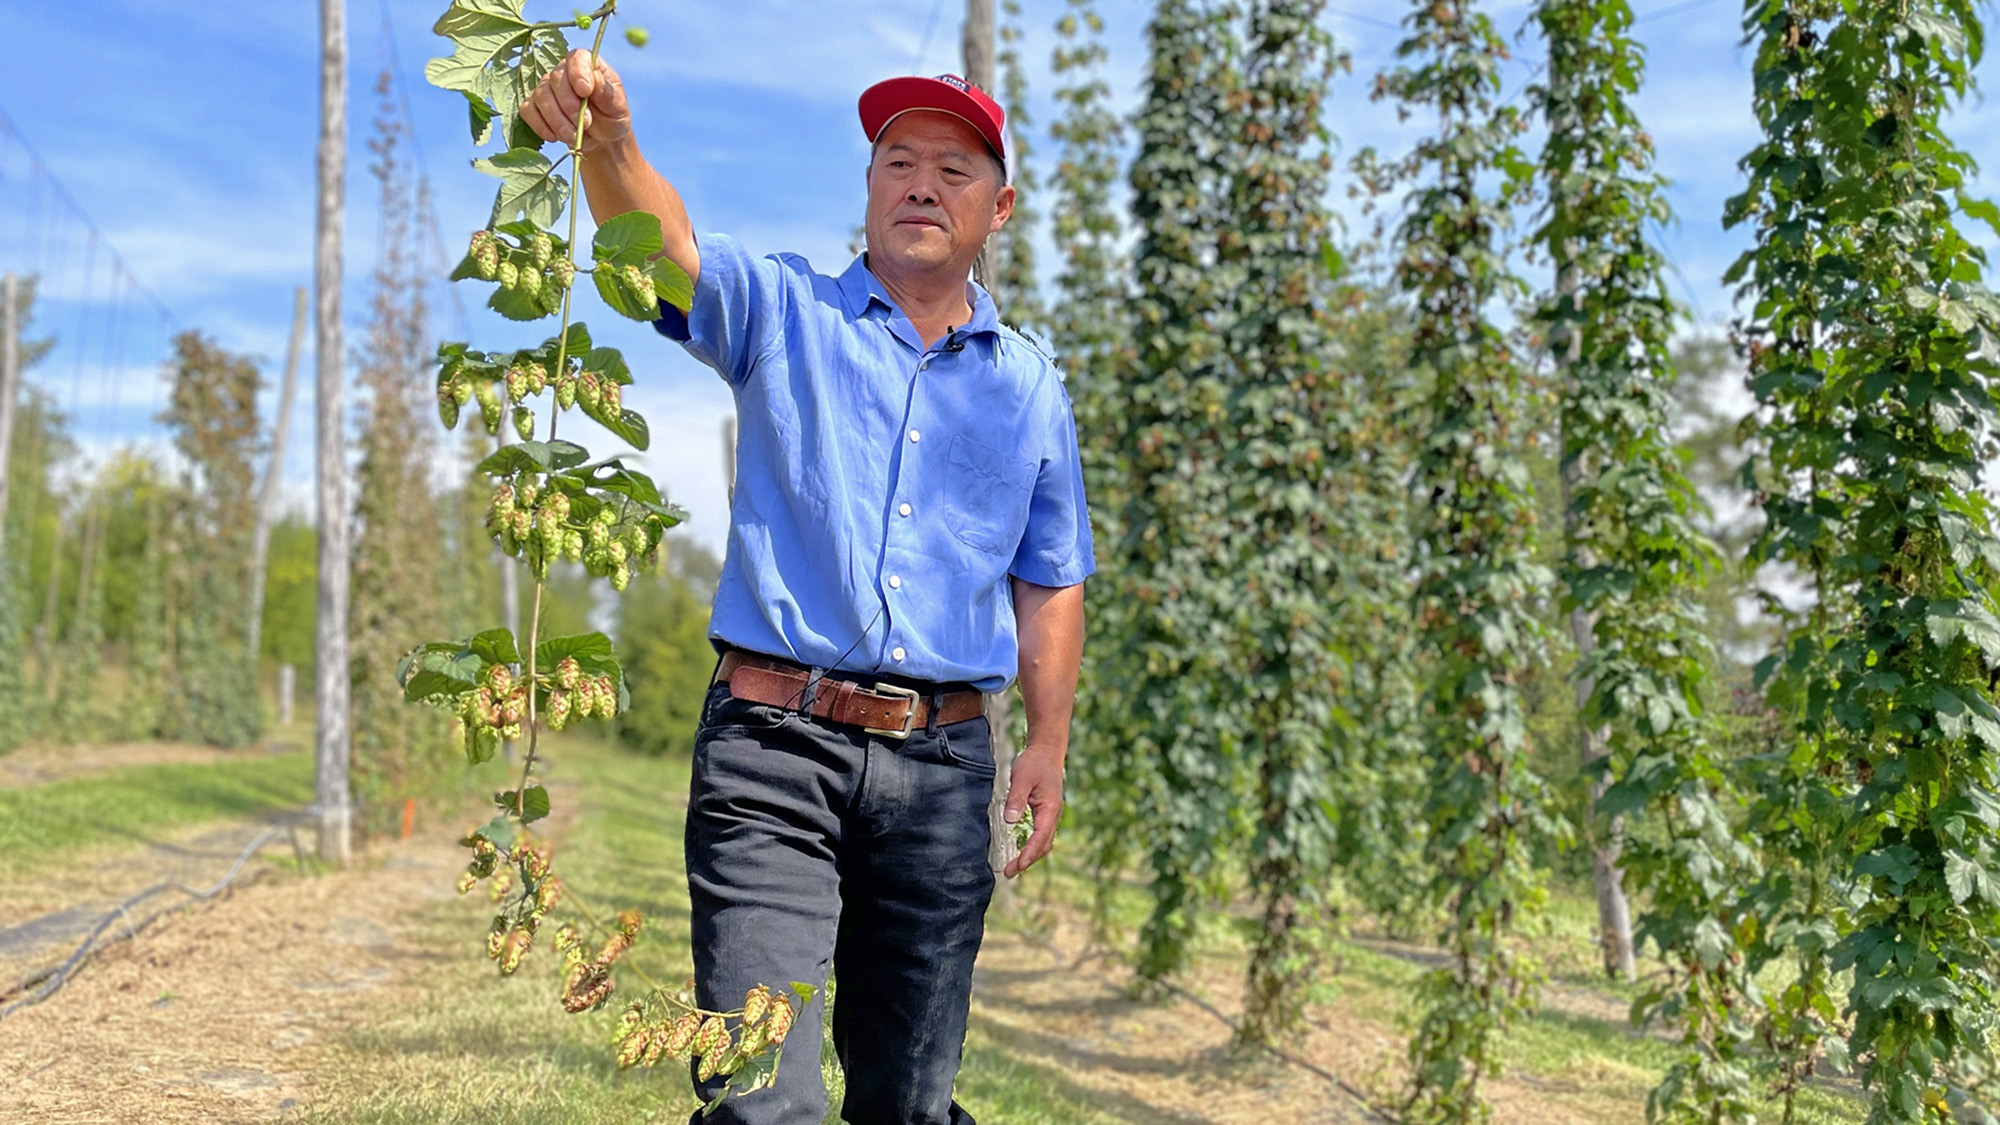 NC State Extension's Homegrown video series explores North Carolina hops.